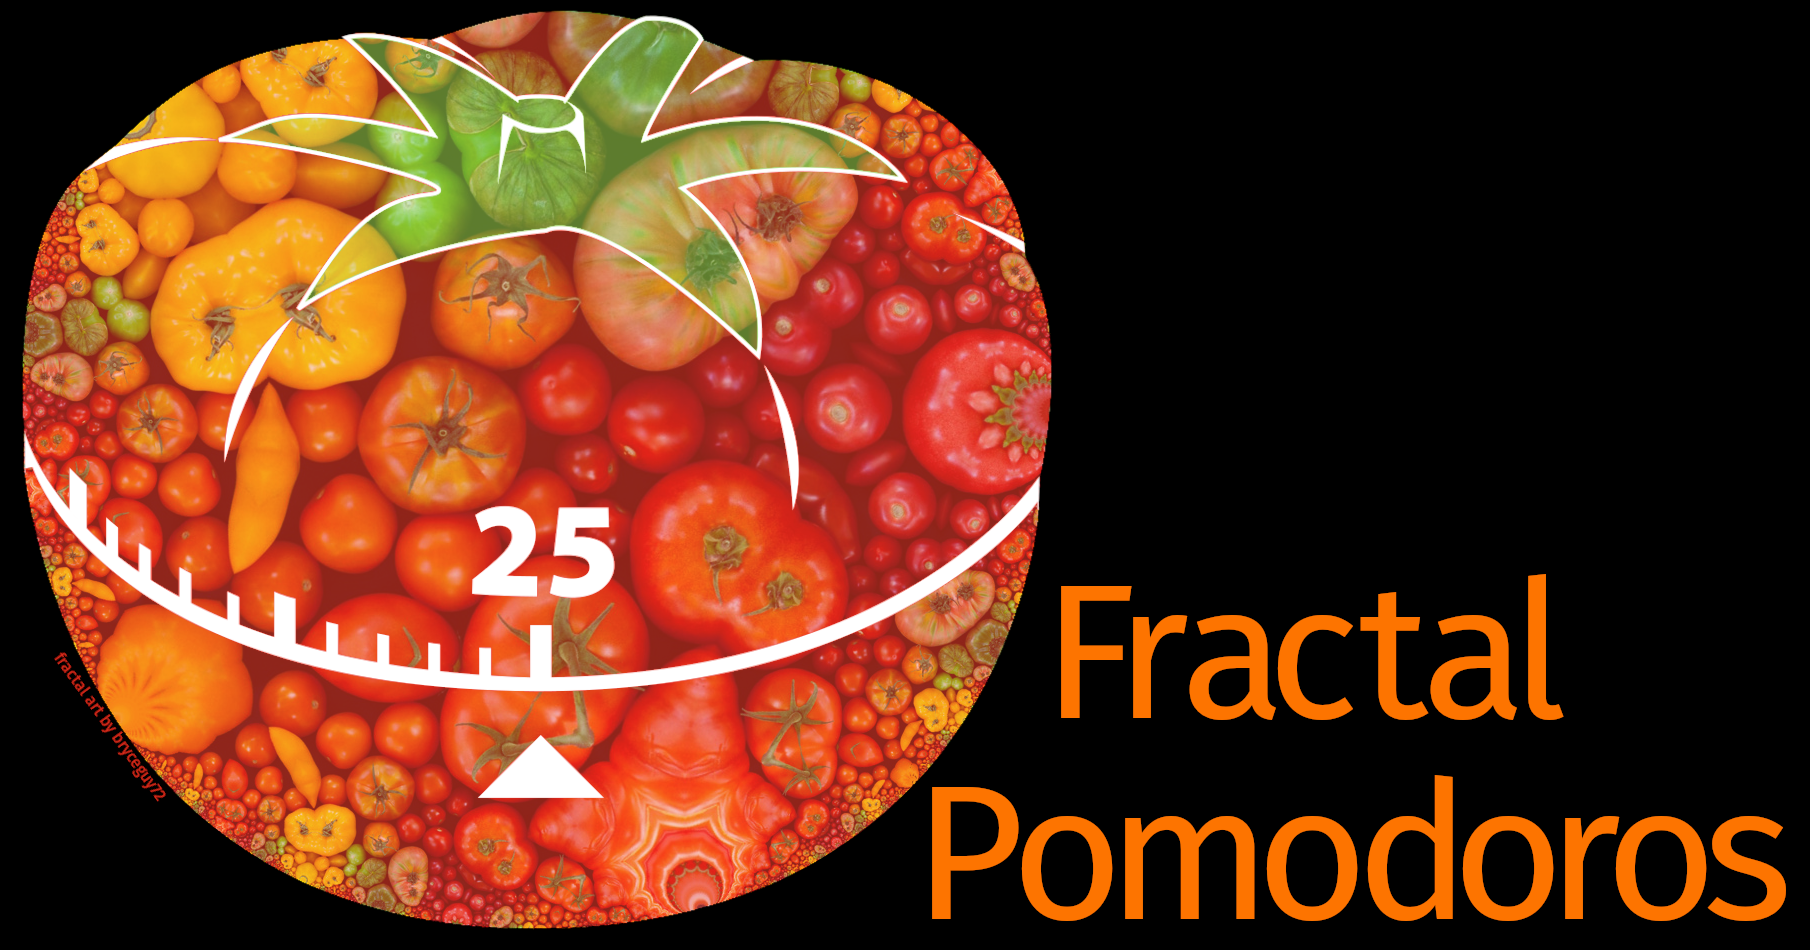 A pomodoro icon composed of an image of hyperbolically tiled tomatos (technically not a fractal, but evocative)